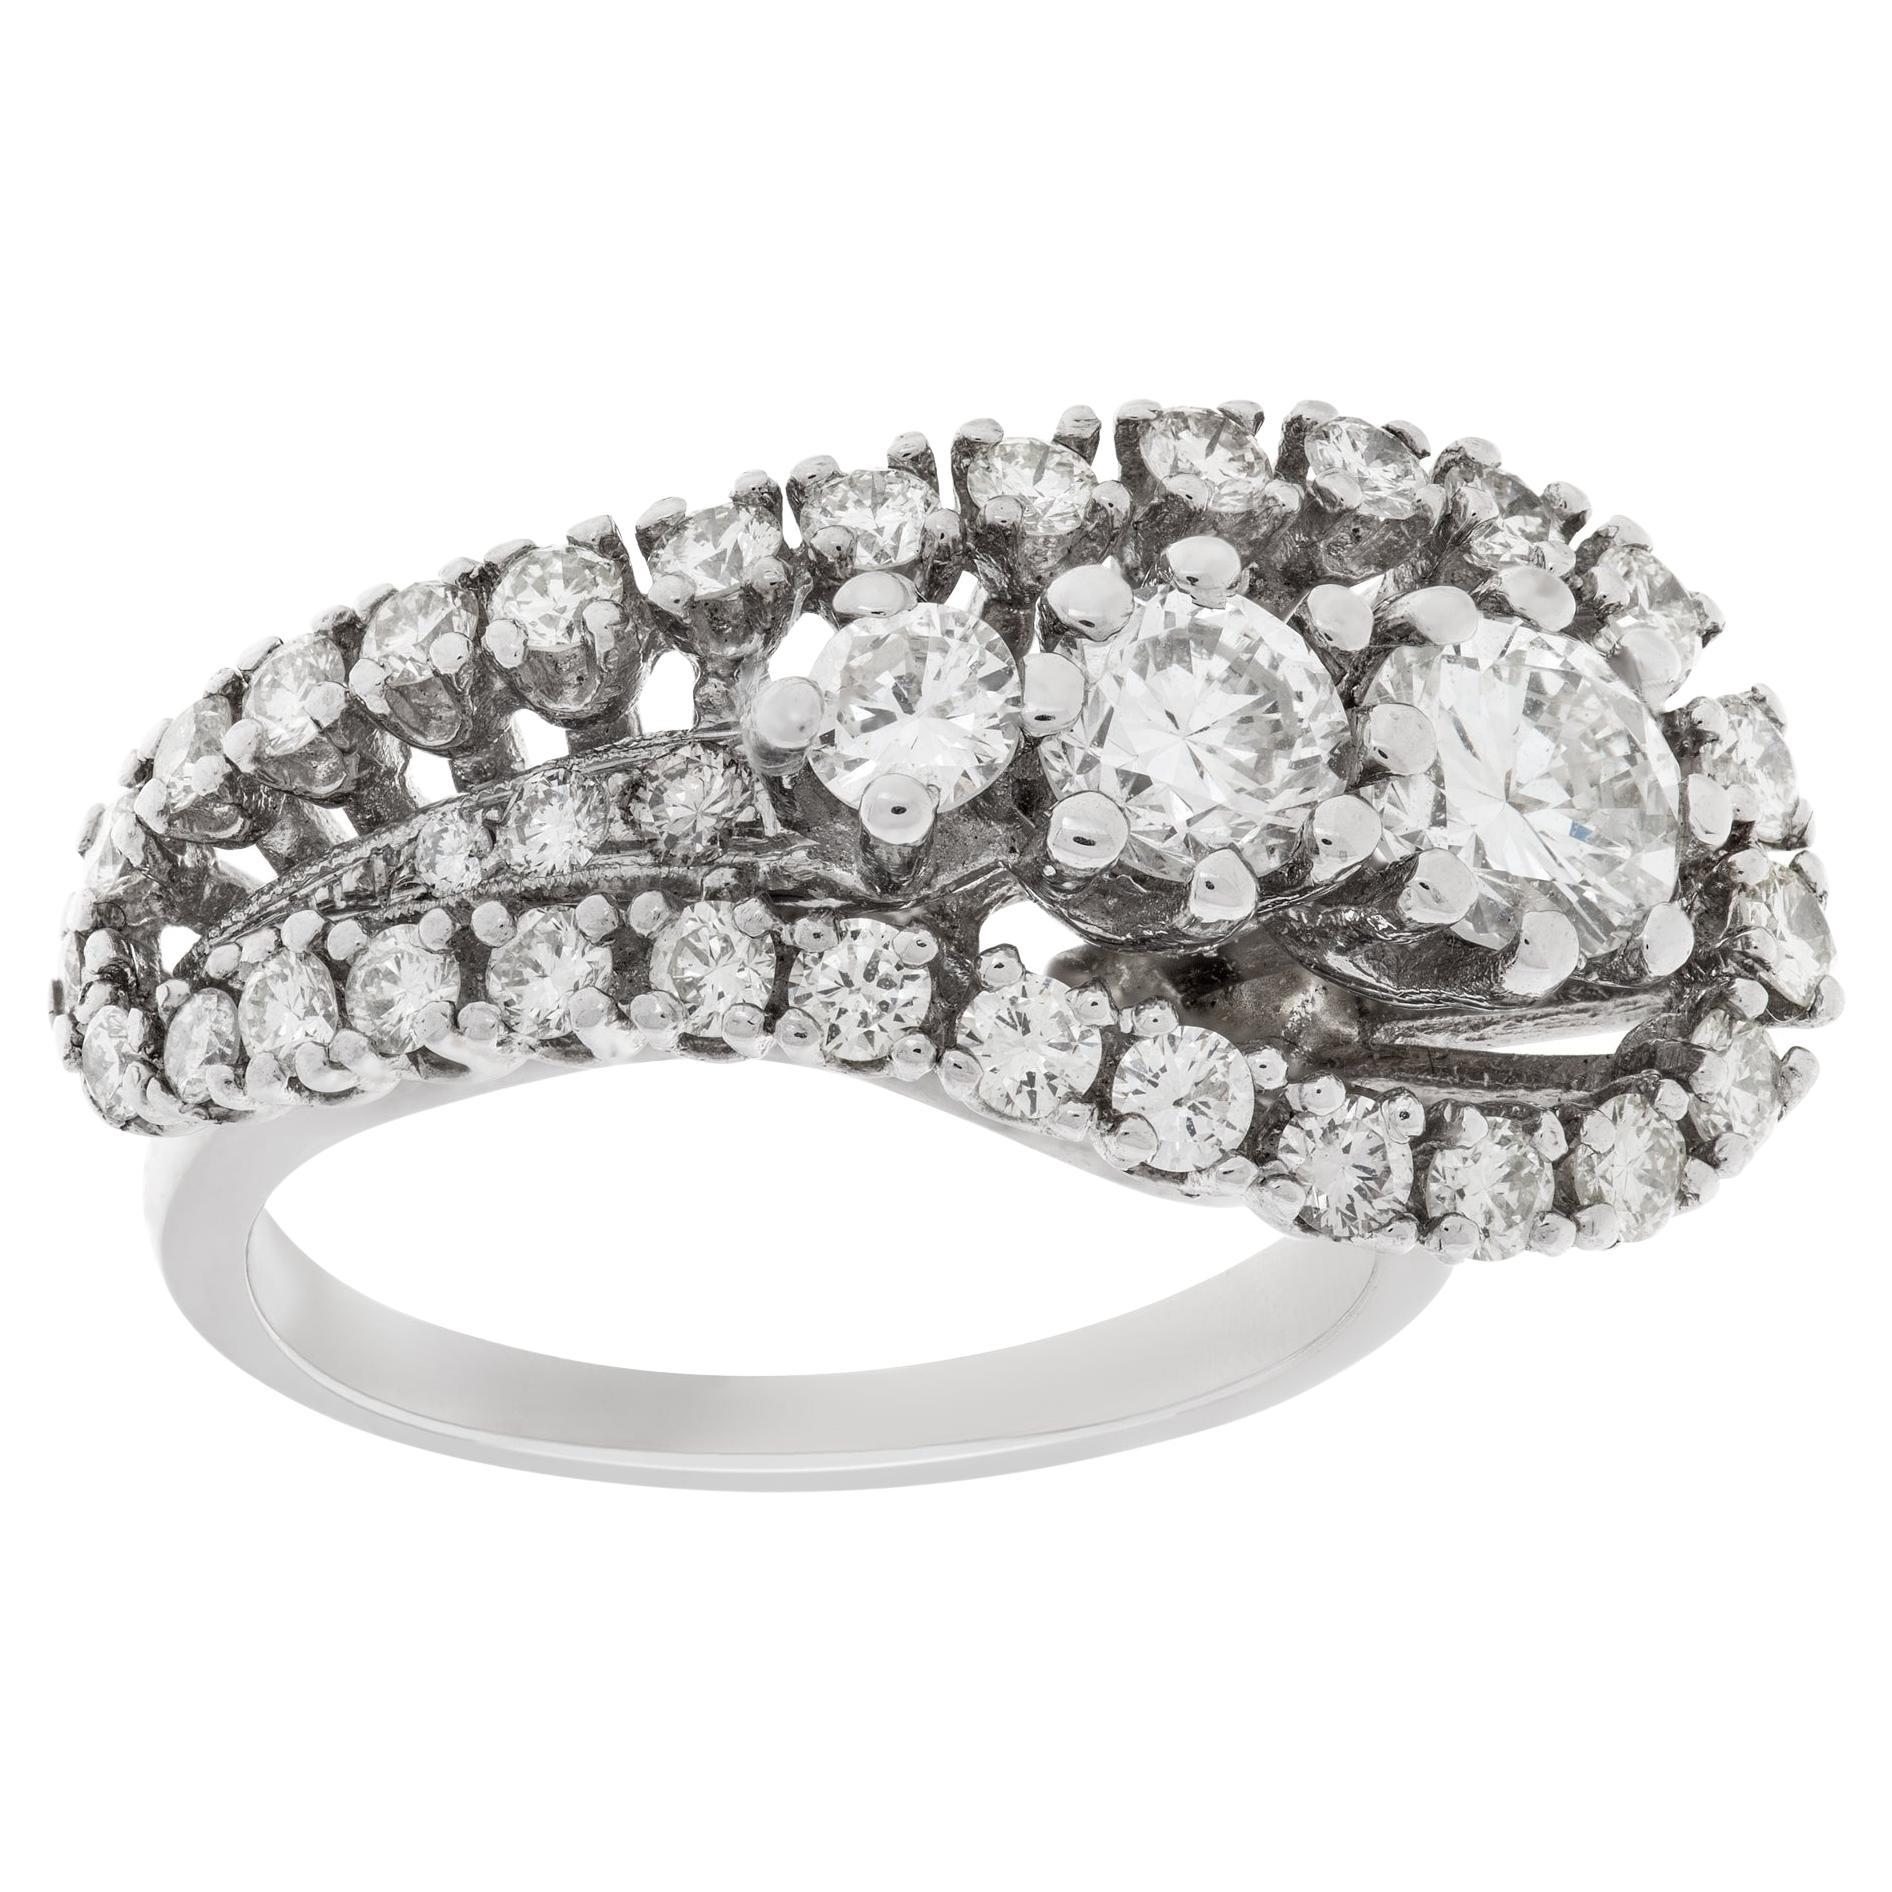 Swirl Diamond Ring in 14k White Gold, 2.00 Carats in White Clean Diamonds For Sale